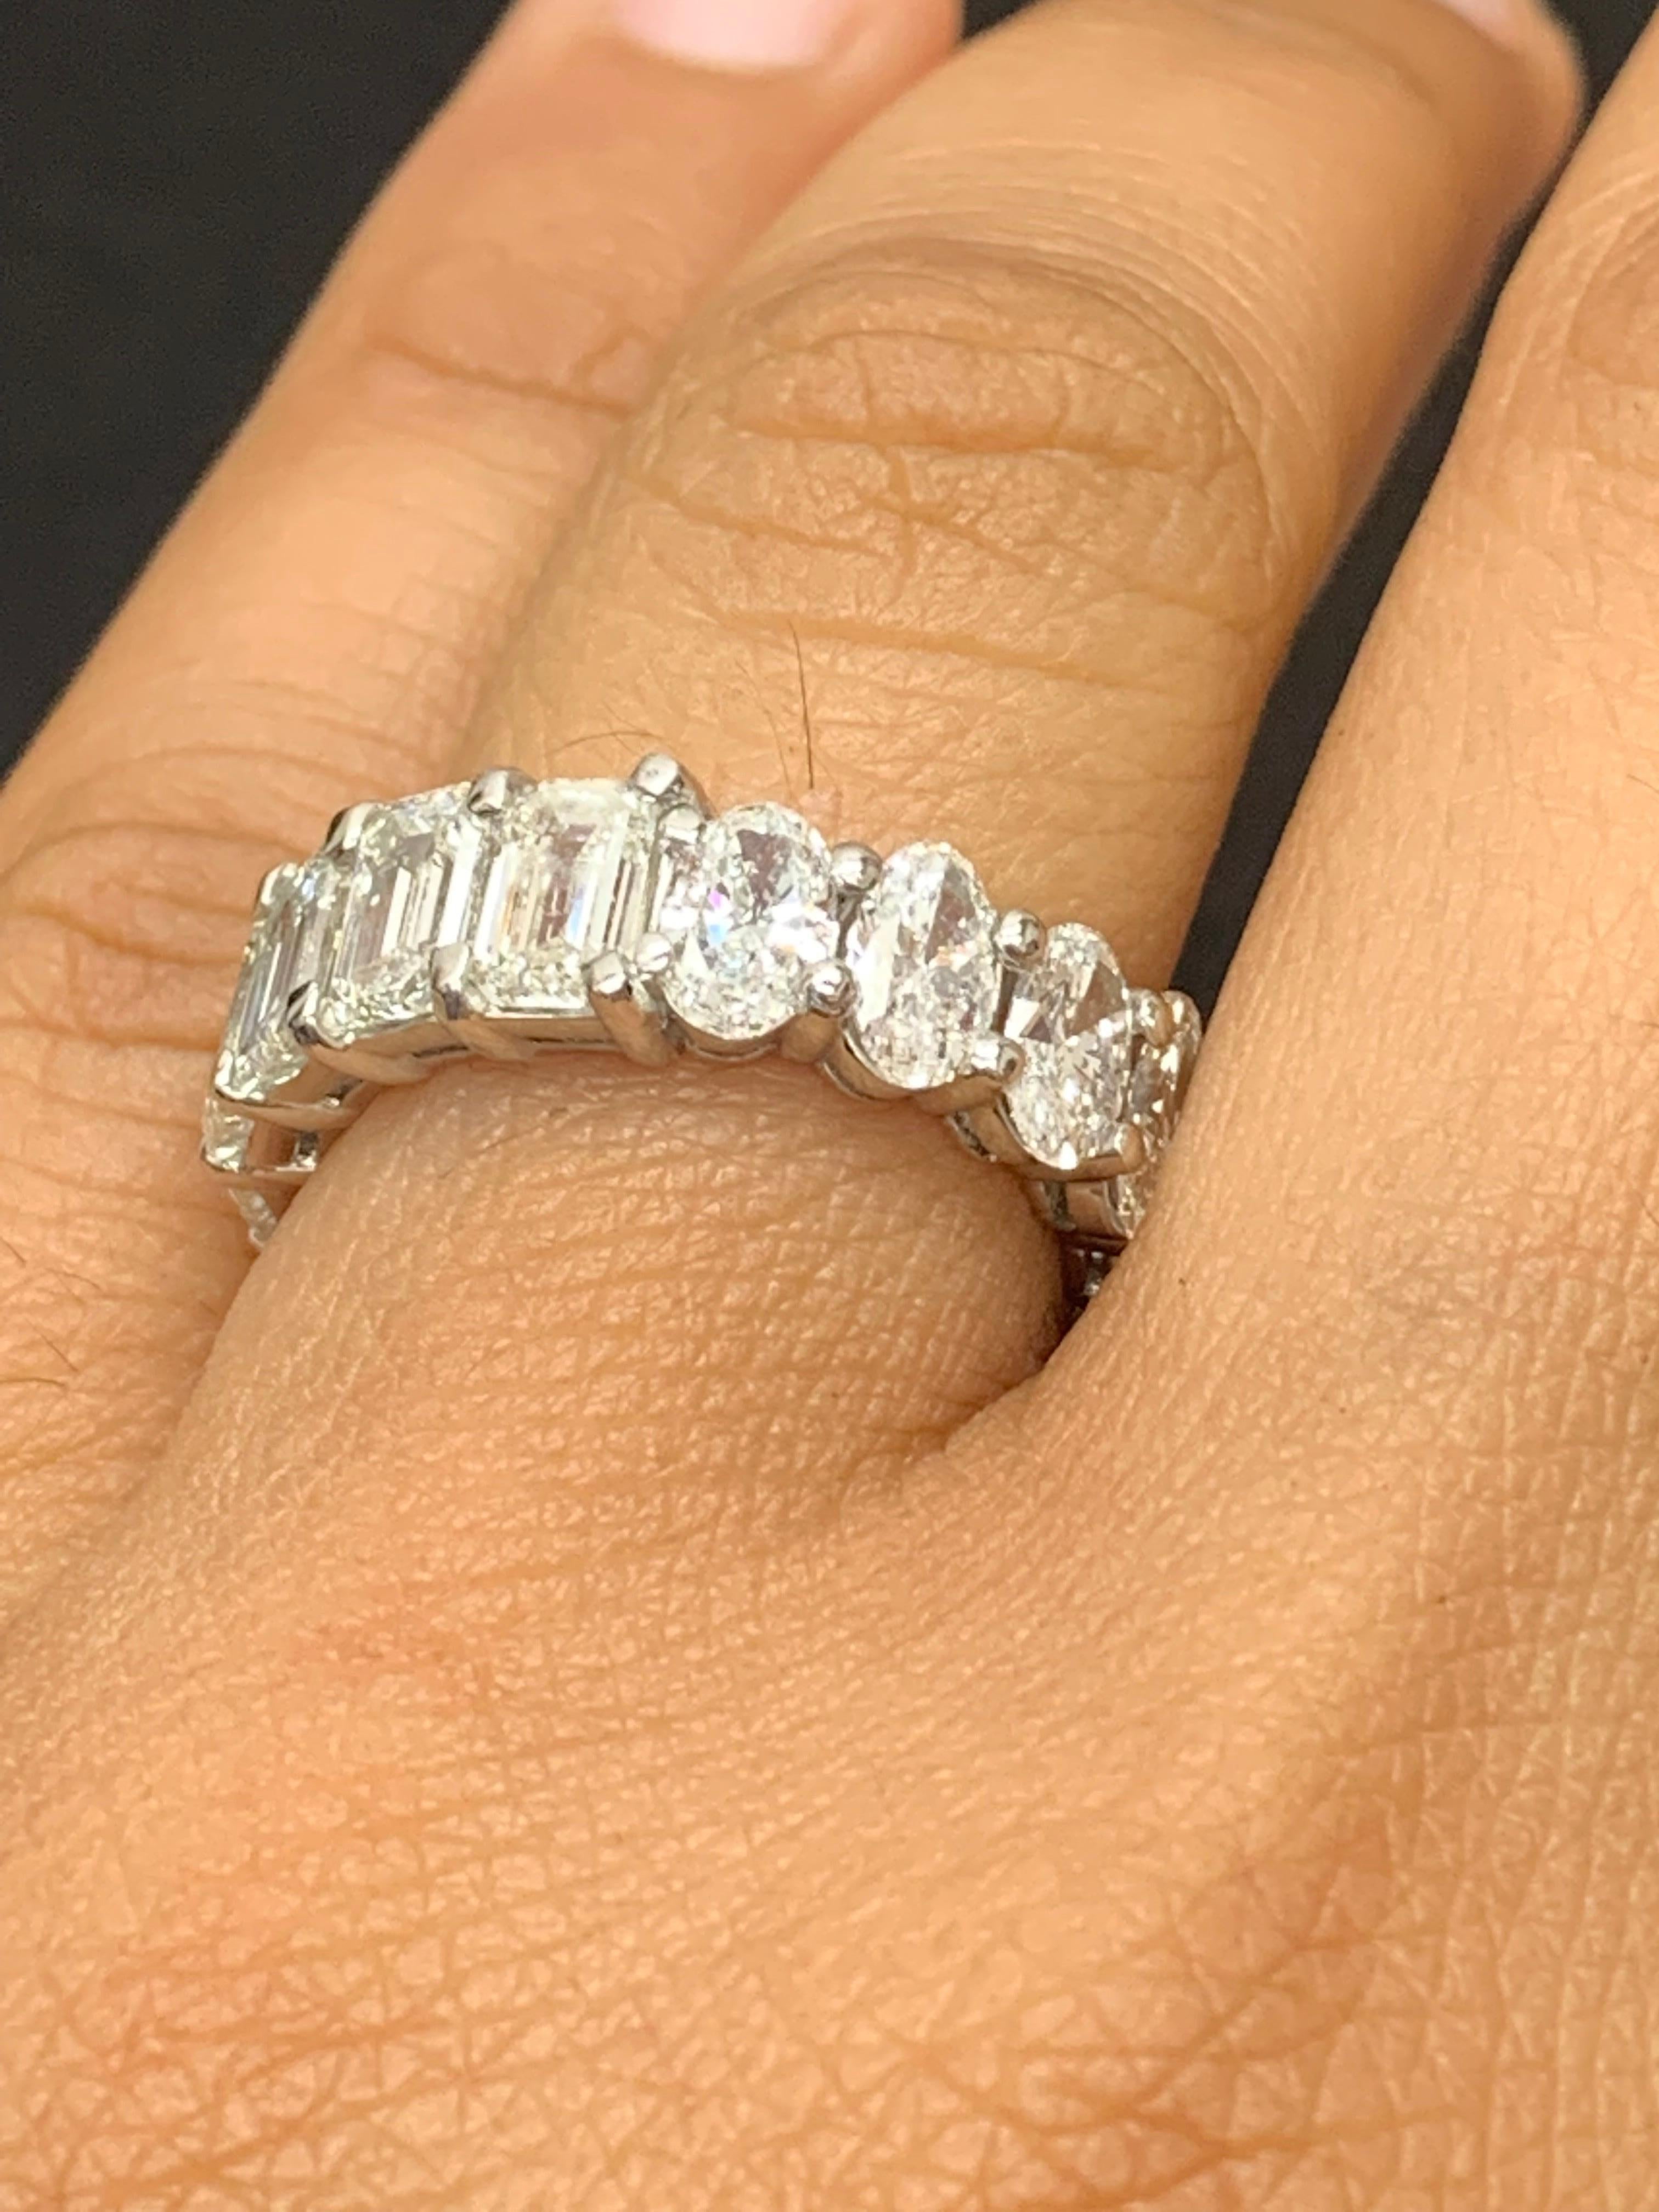 A classic and timeless eternity band style showcasing a row of half emerald cut and half oval cut diamonds set in a shared prong platinum mounting. 9 emerald cut Diamonds weigh 4.66 carats and 8 oval cut diamonds weighing 2.67 carats. Can be